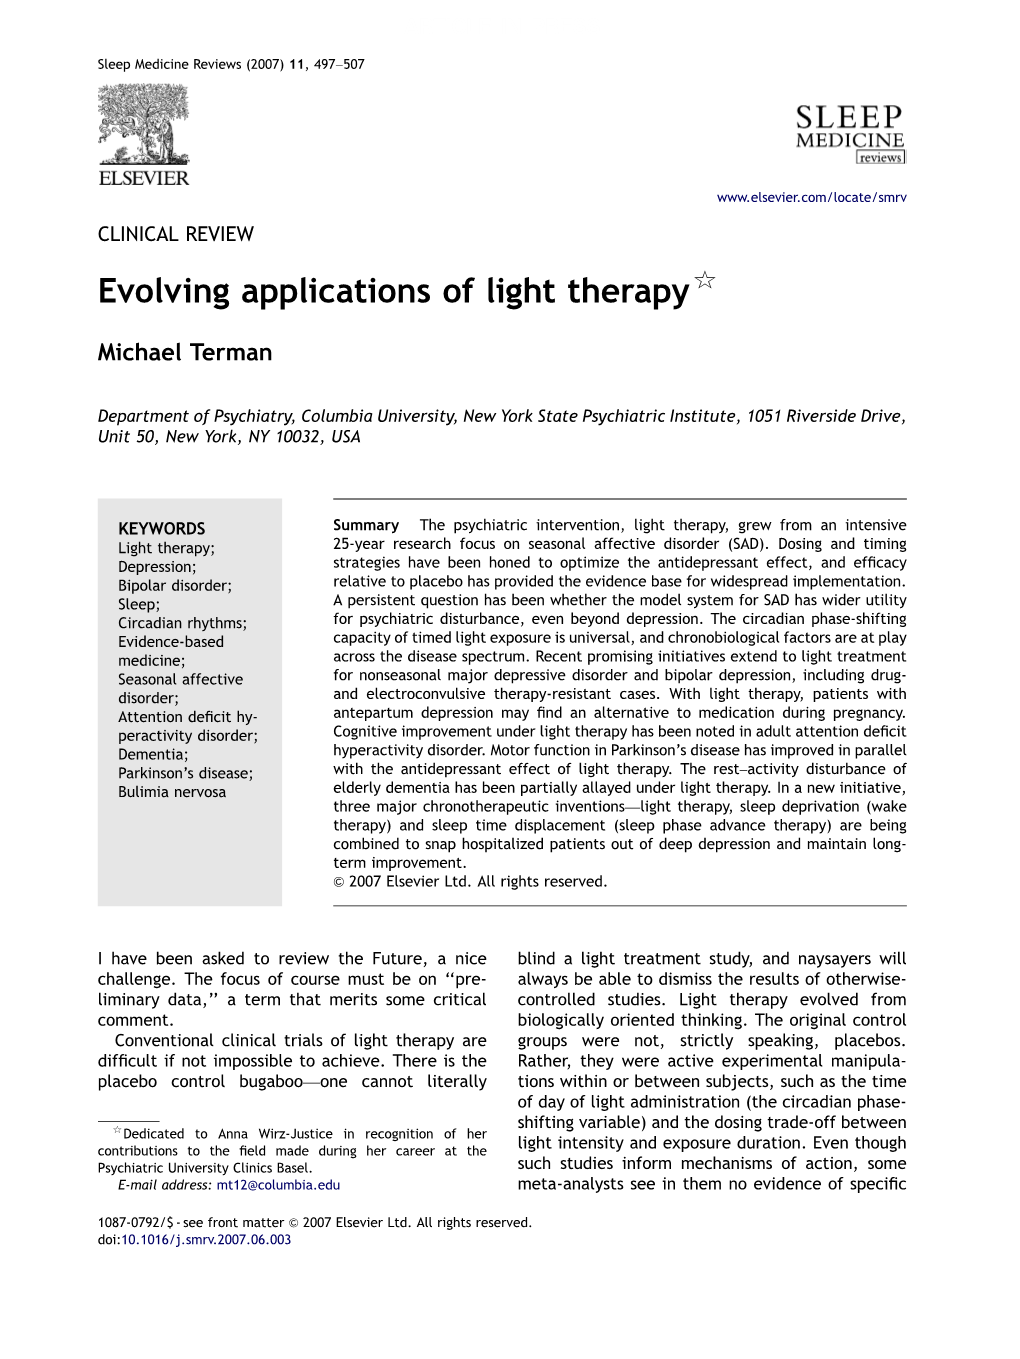 Evolving Applications of Light Therapy$